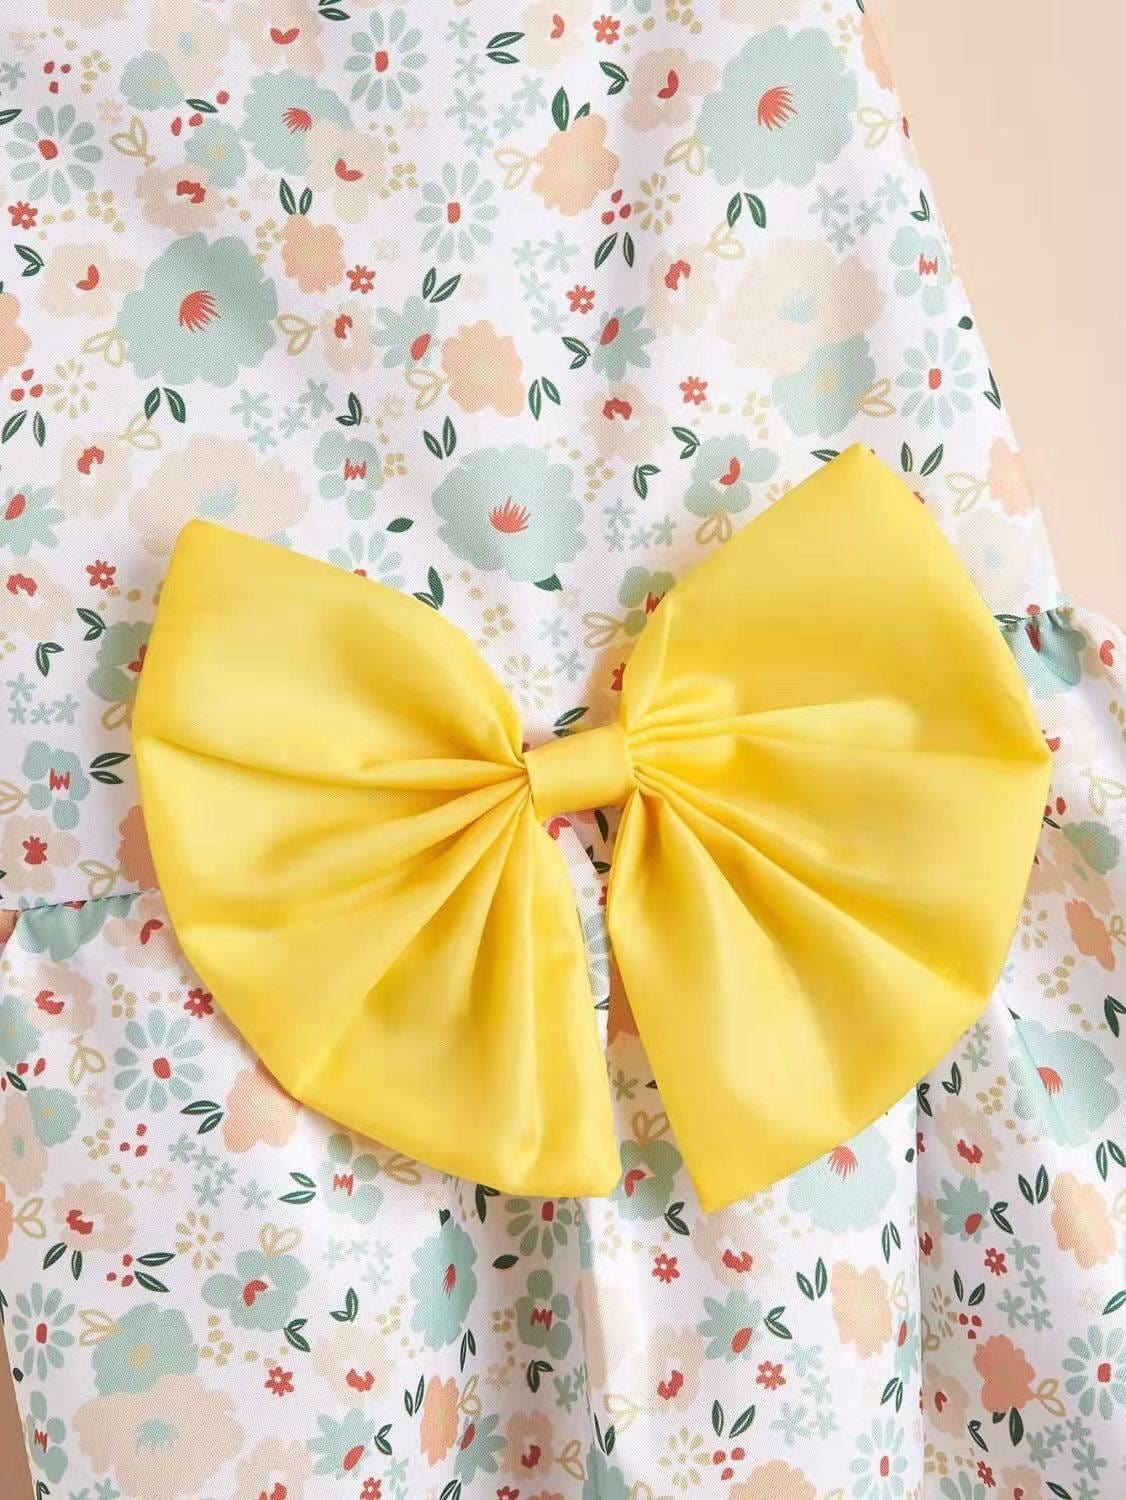 KUTKUT Cute Florals Pattern Dog Dress with Lovely Bow Pet Apparel Dog Clothes for Small Dogs and Cats | Puppy Summer Dress Birthday Pet Apparel Dress  (Yellow) - kutkutstyle